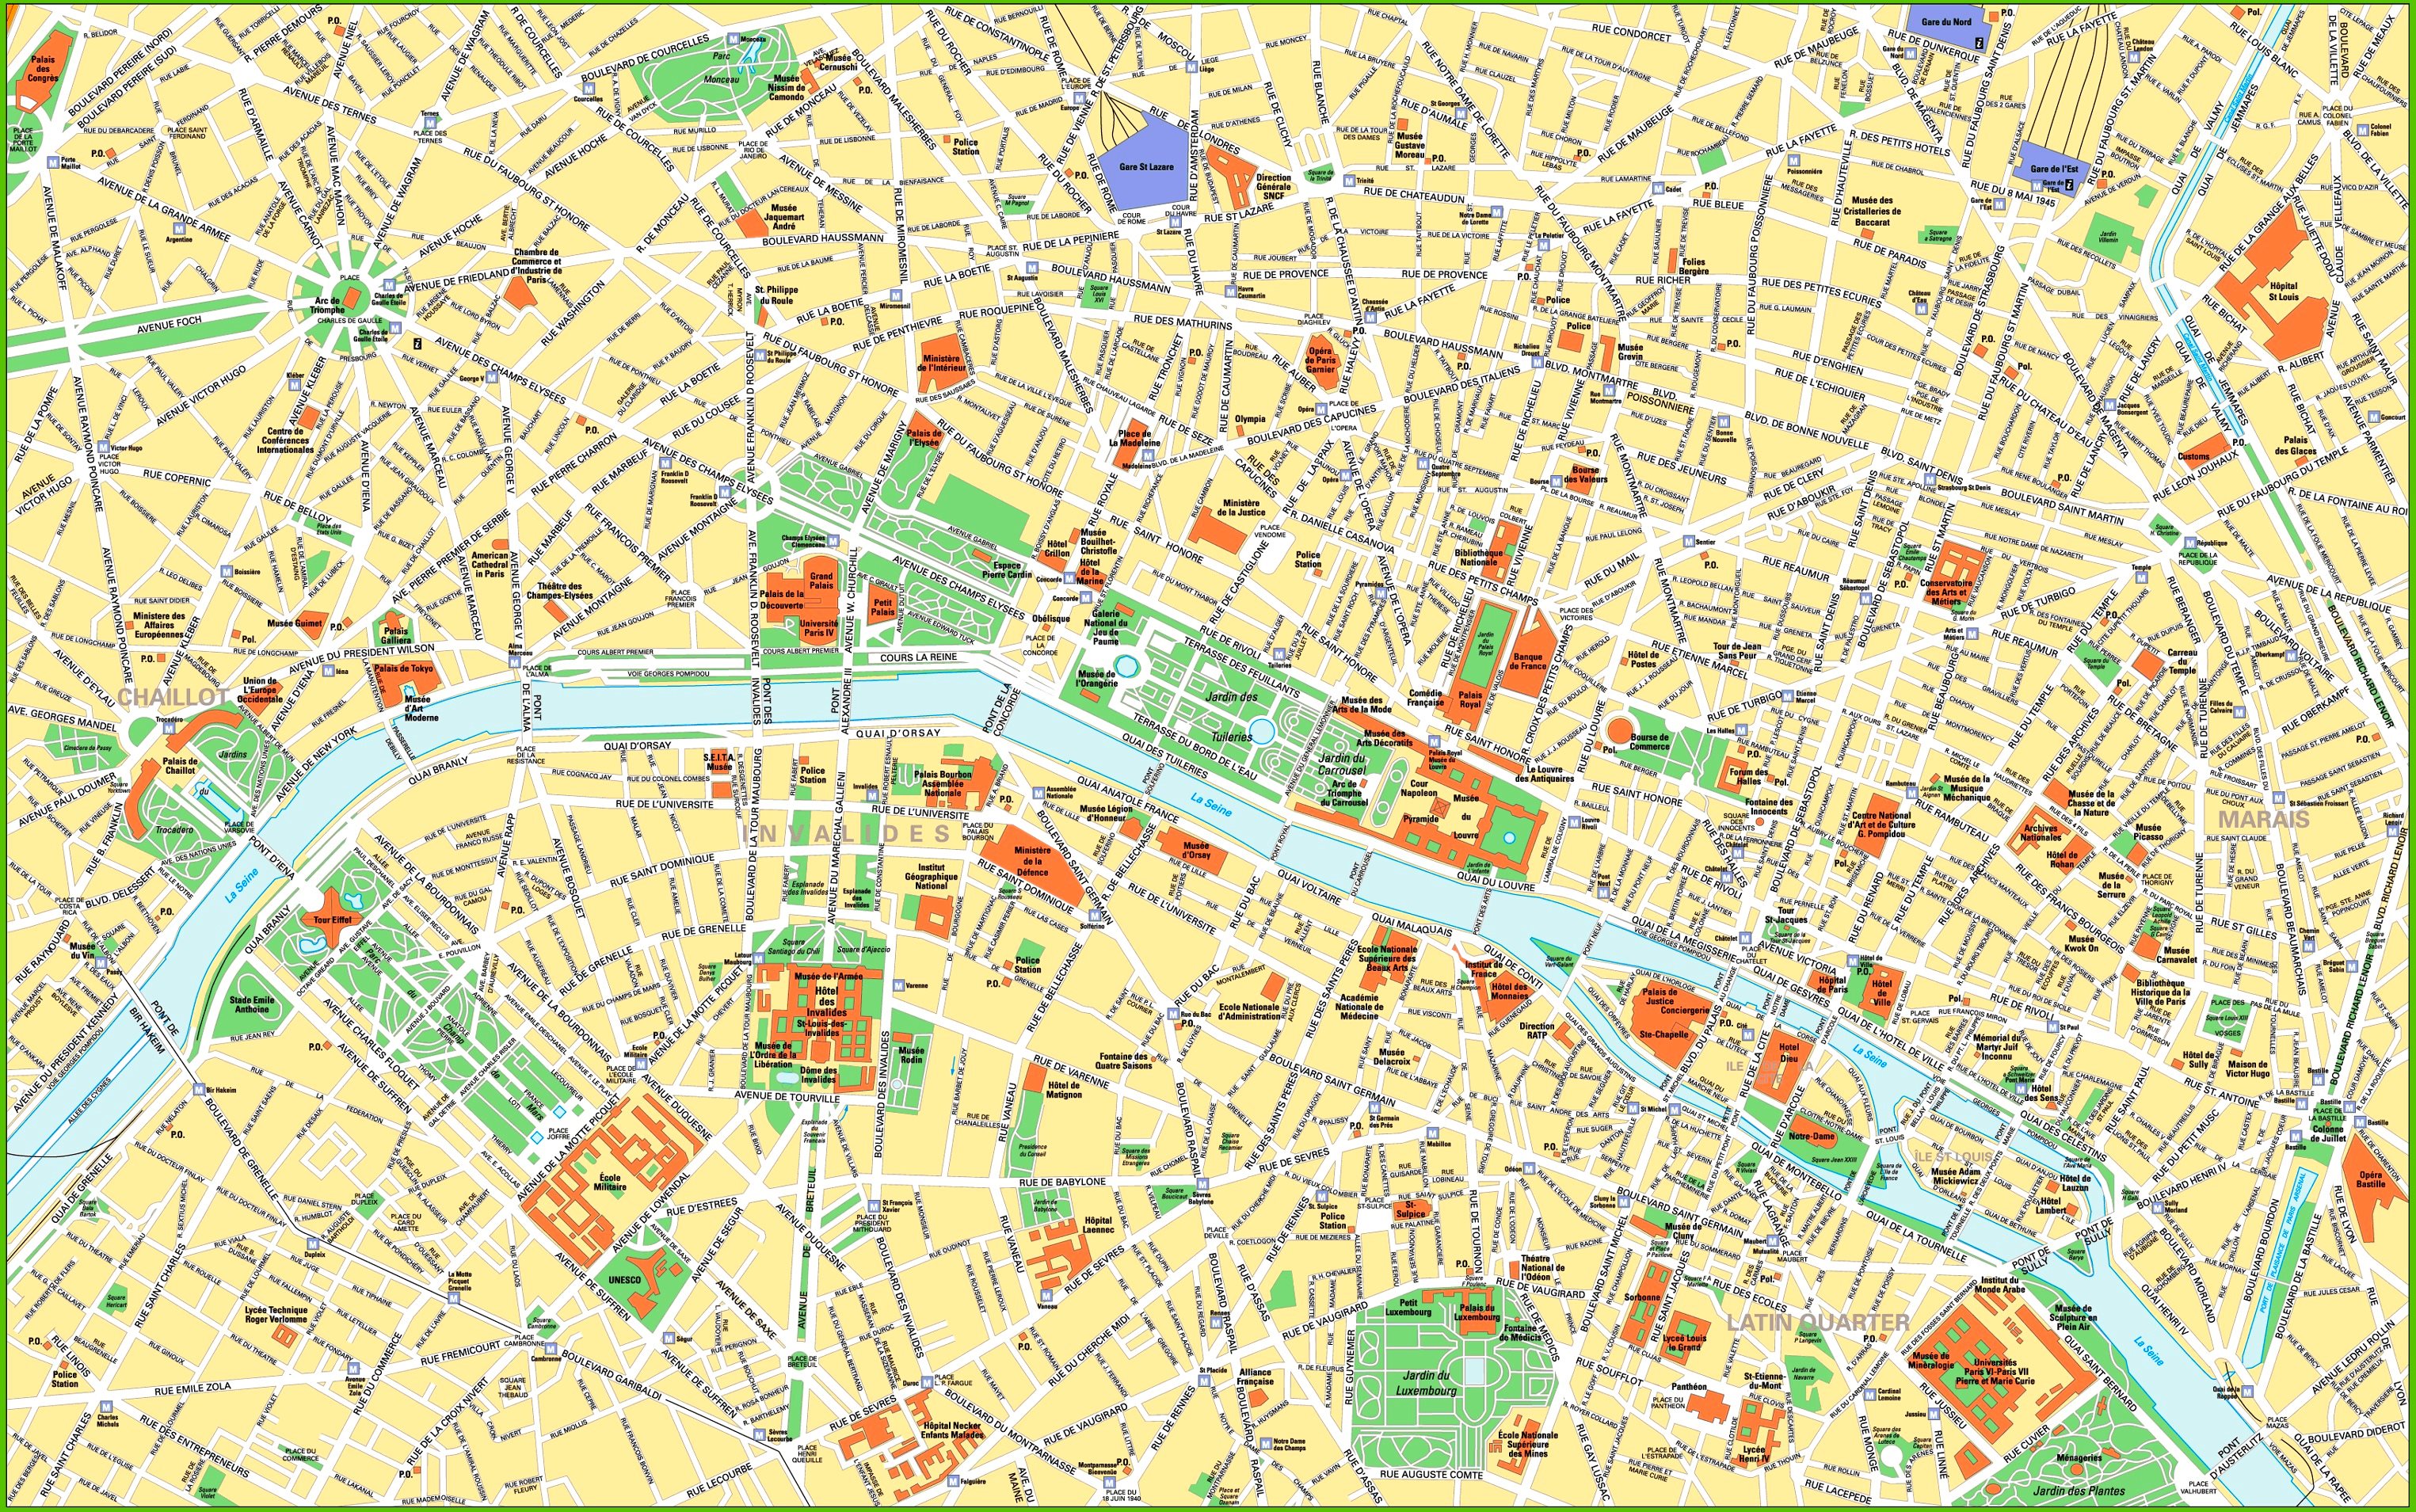 Paris City Centre Map With Tourist Attractions And Sightseeings